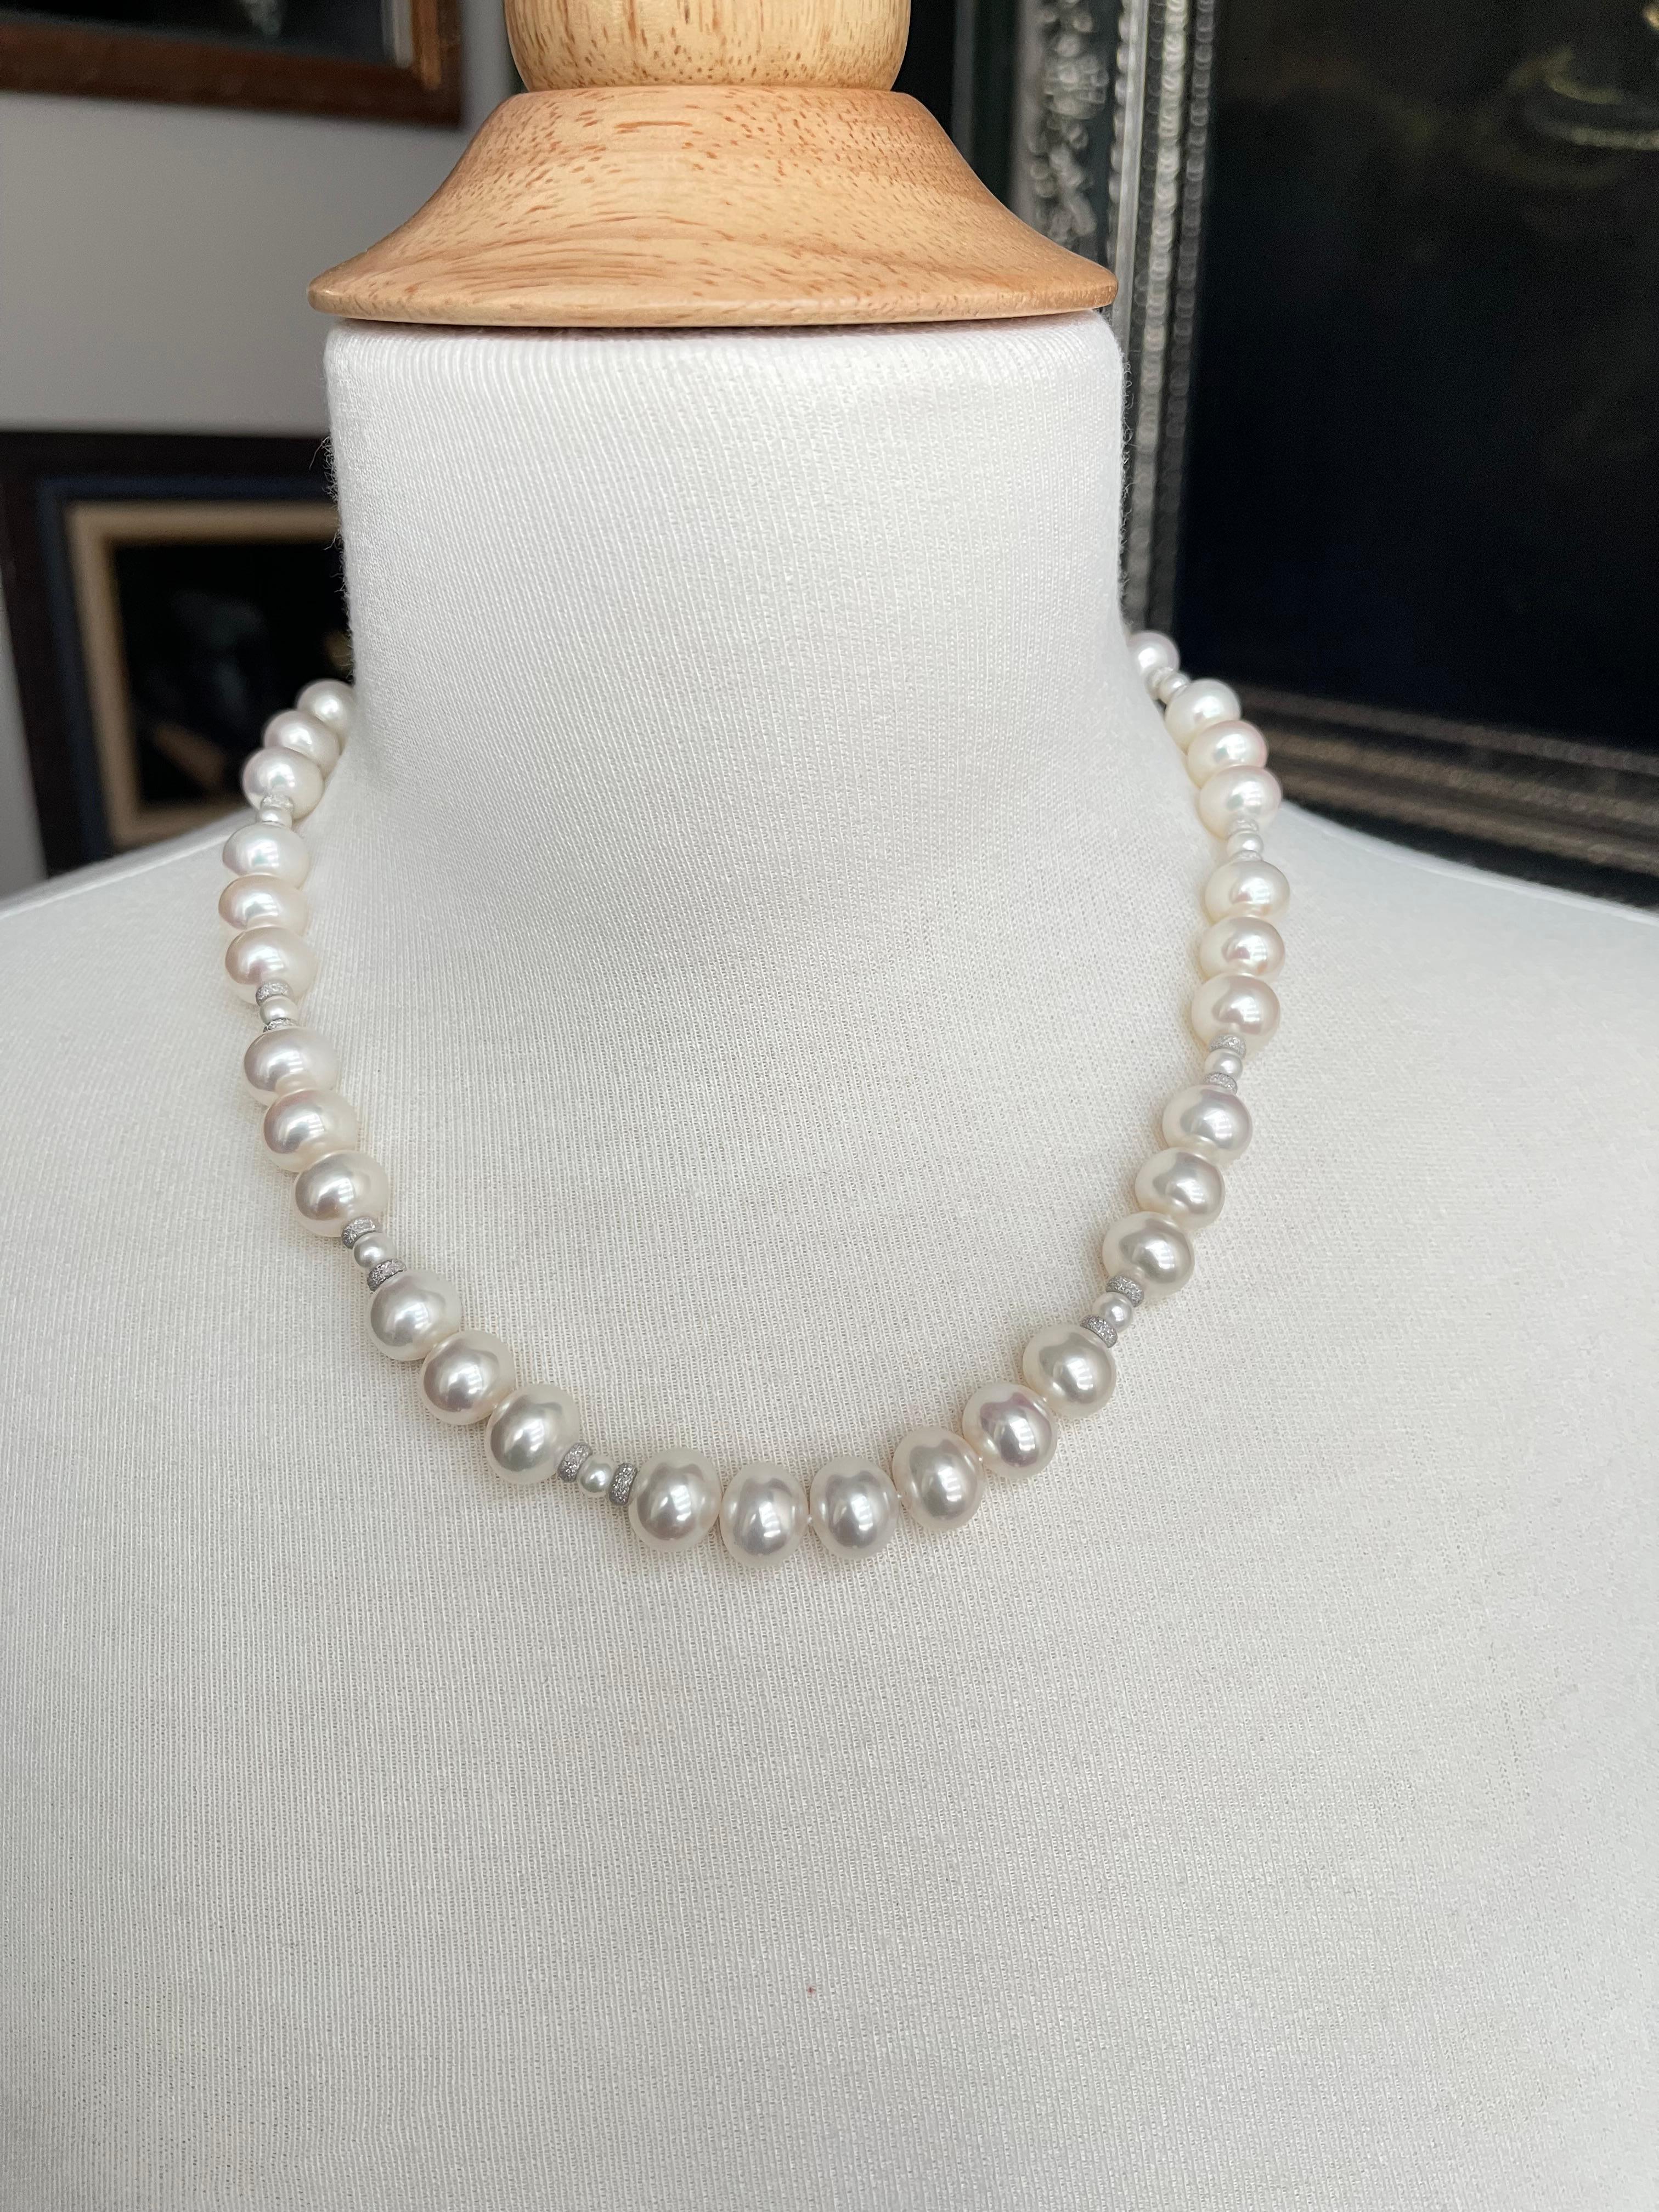 Women's or Men's White Freshwater Pearl Necklace with White Gold Accents, 18.5 Inches For Sale